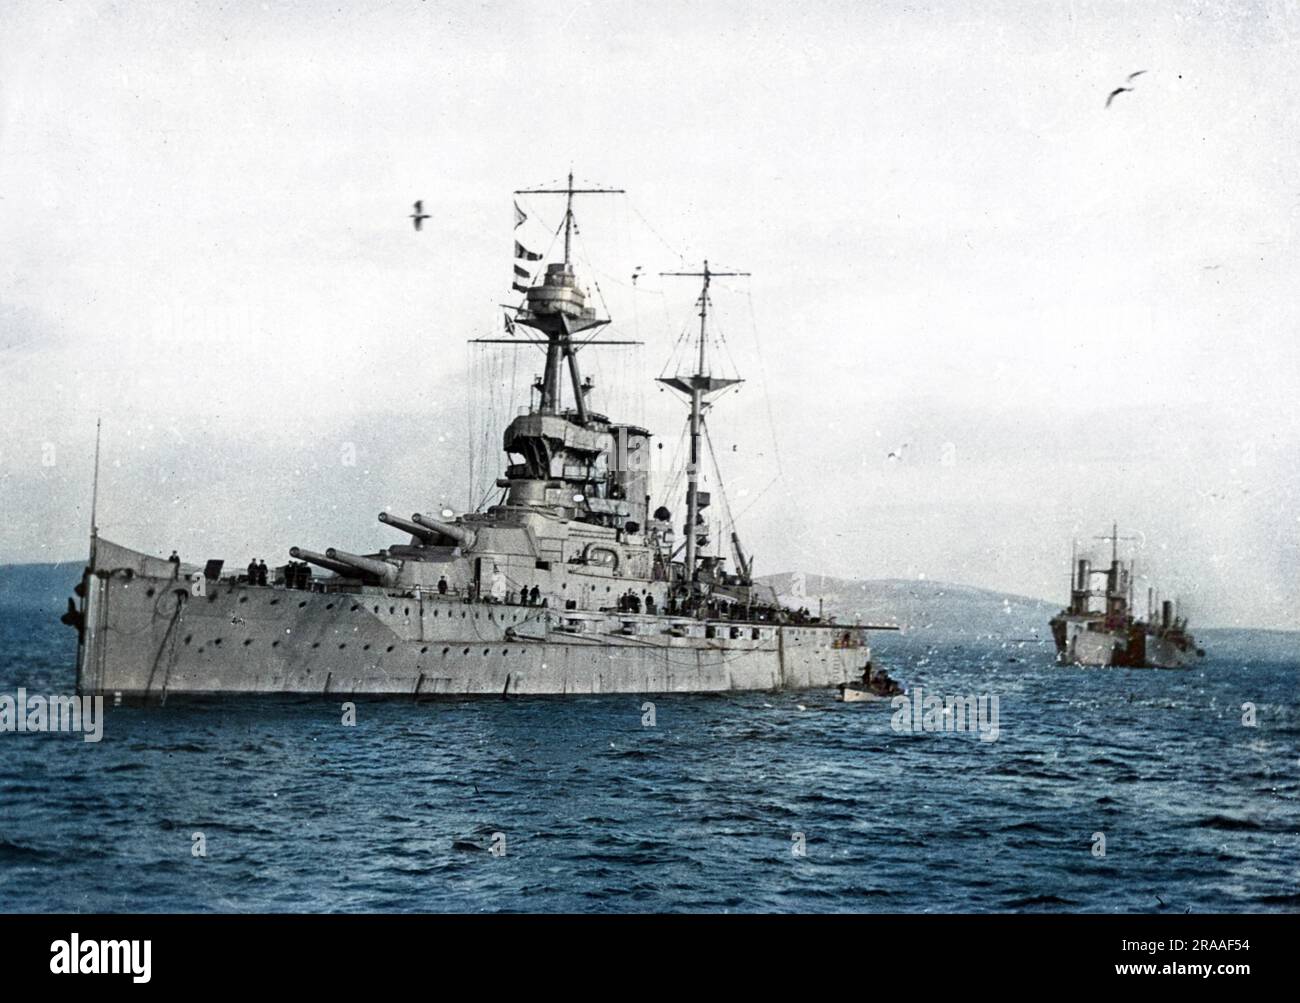 HMS Malaya, a Queen Elizabeth class British battleship, launched 1915, served during the First World War including the Battle of Jutland, also served in the Second World War, decommissioned 1944.     Date: 1914-1918 Stock Photo